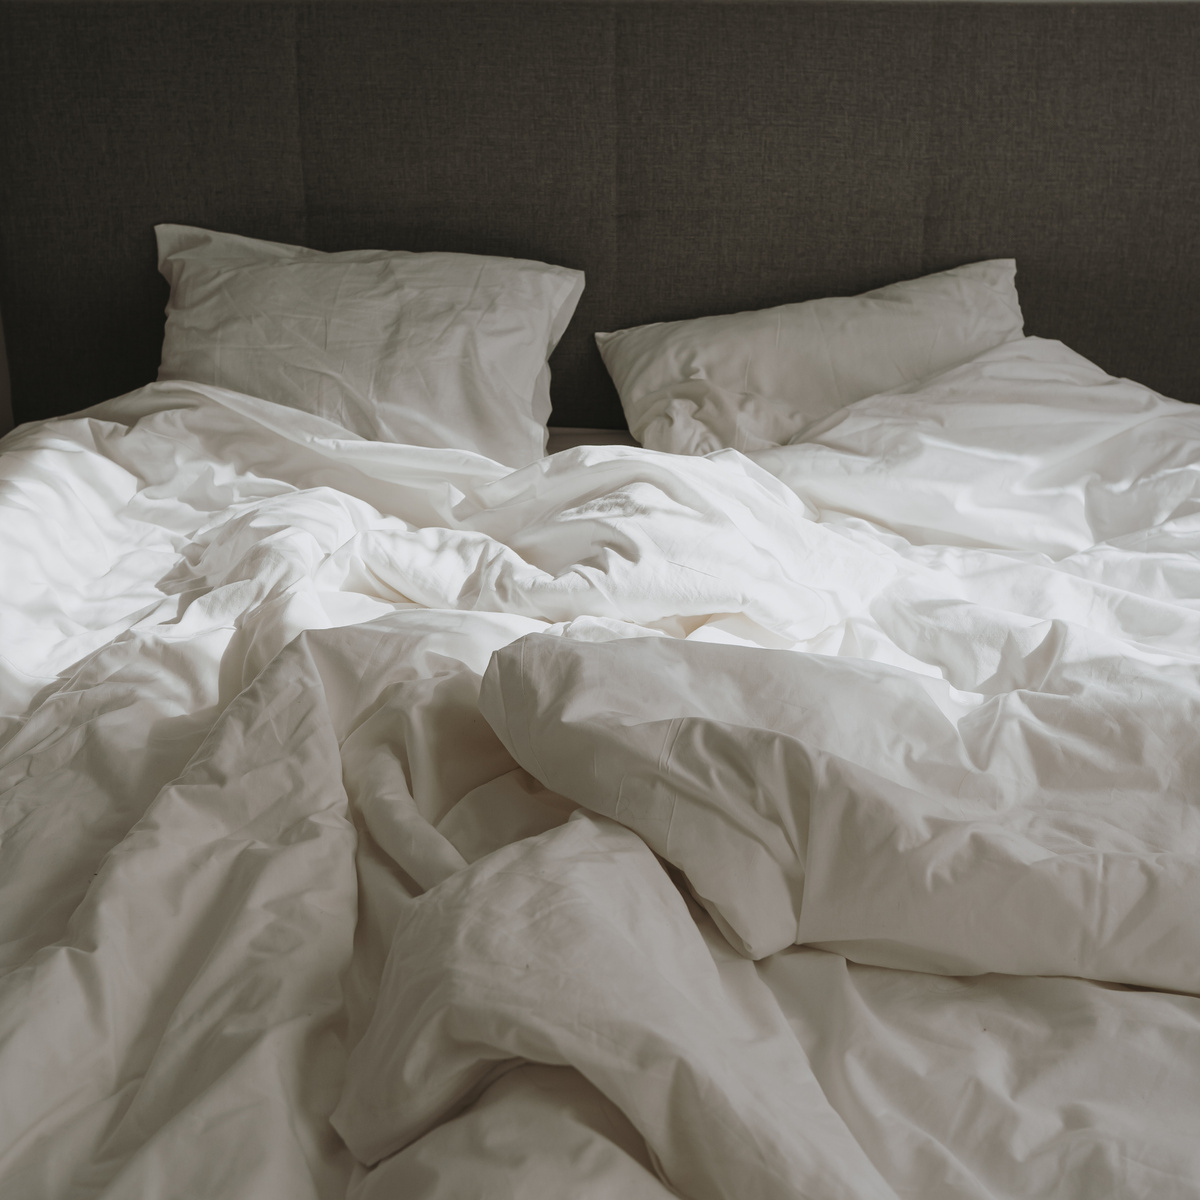 Crumpled White Blanket on the Bed